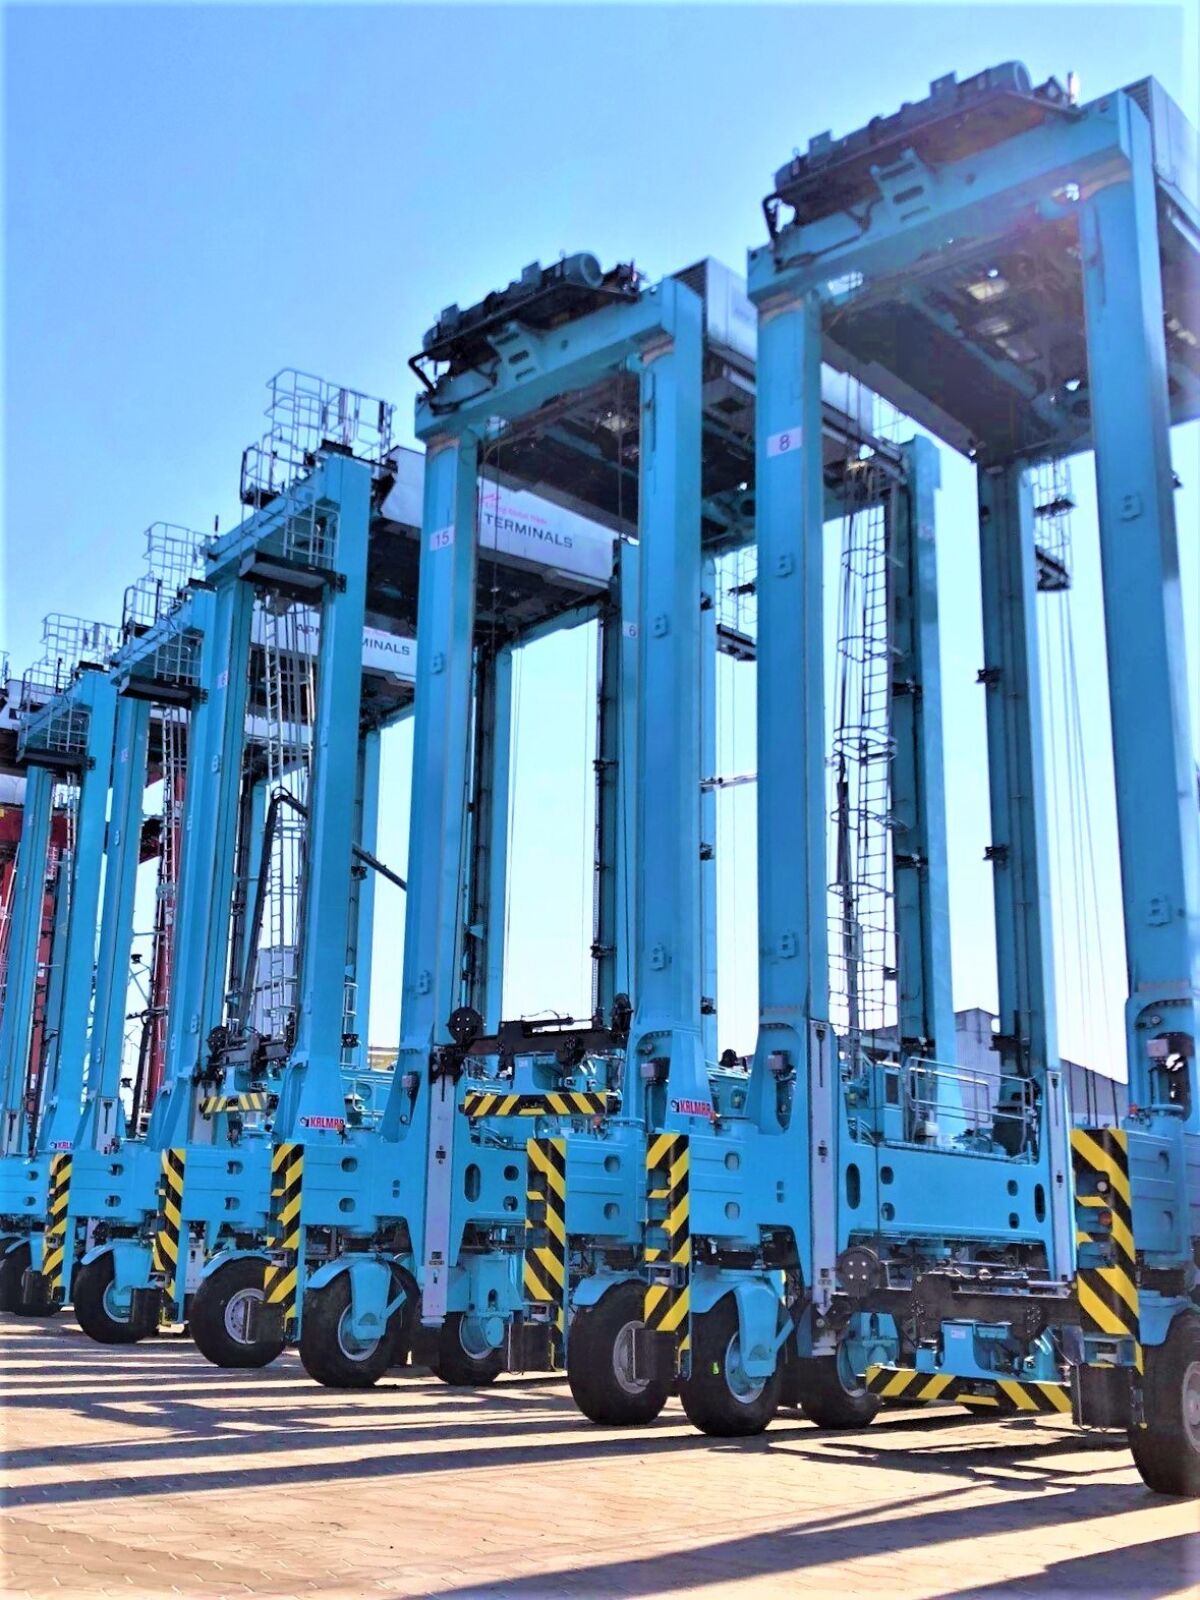 Maersk automated cargo carriers manufactured in Poland.